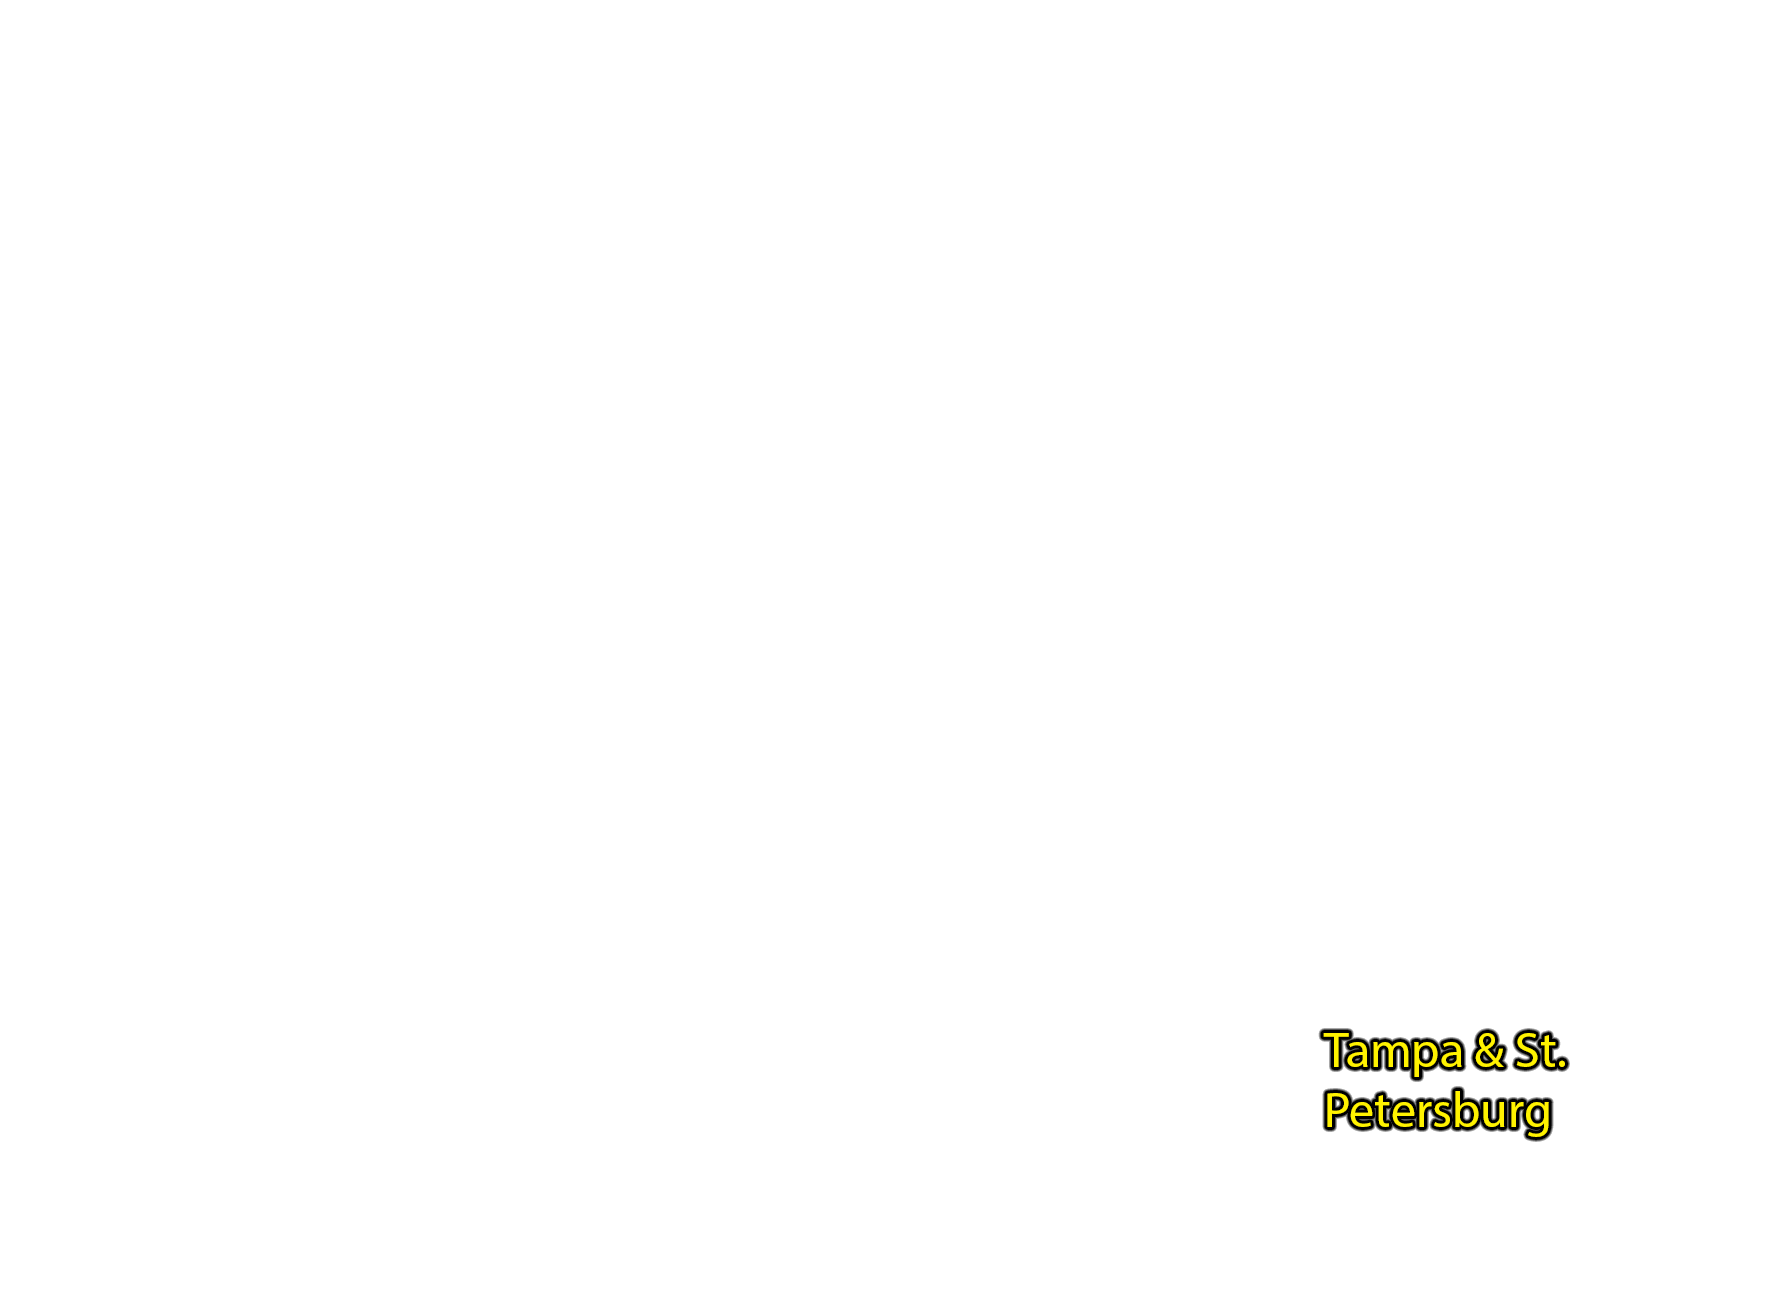 Tampa-&-St.-Petersburg label with glow